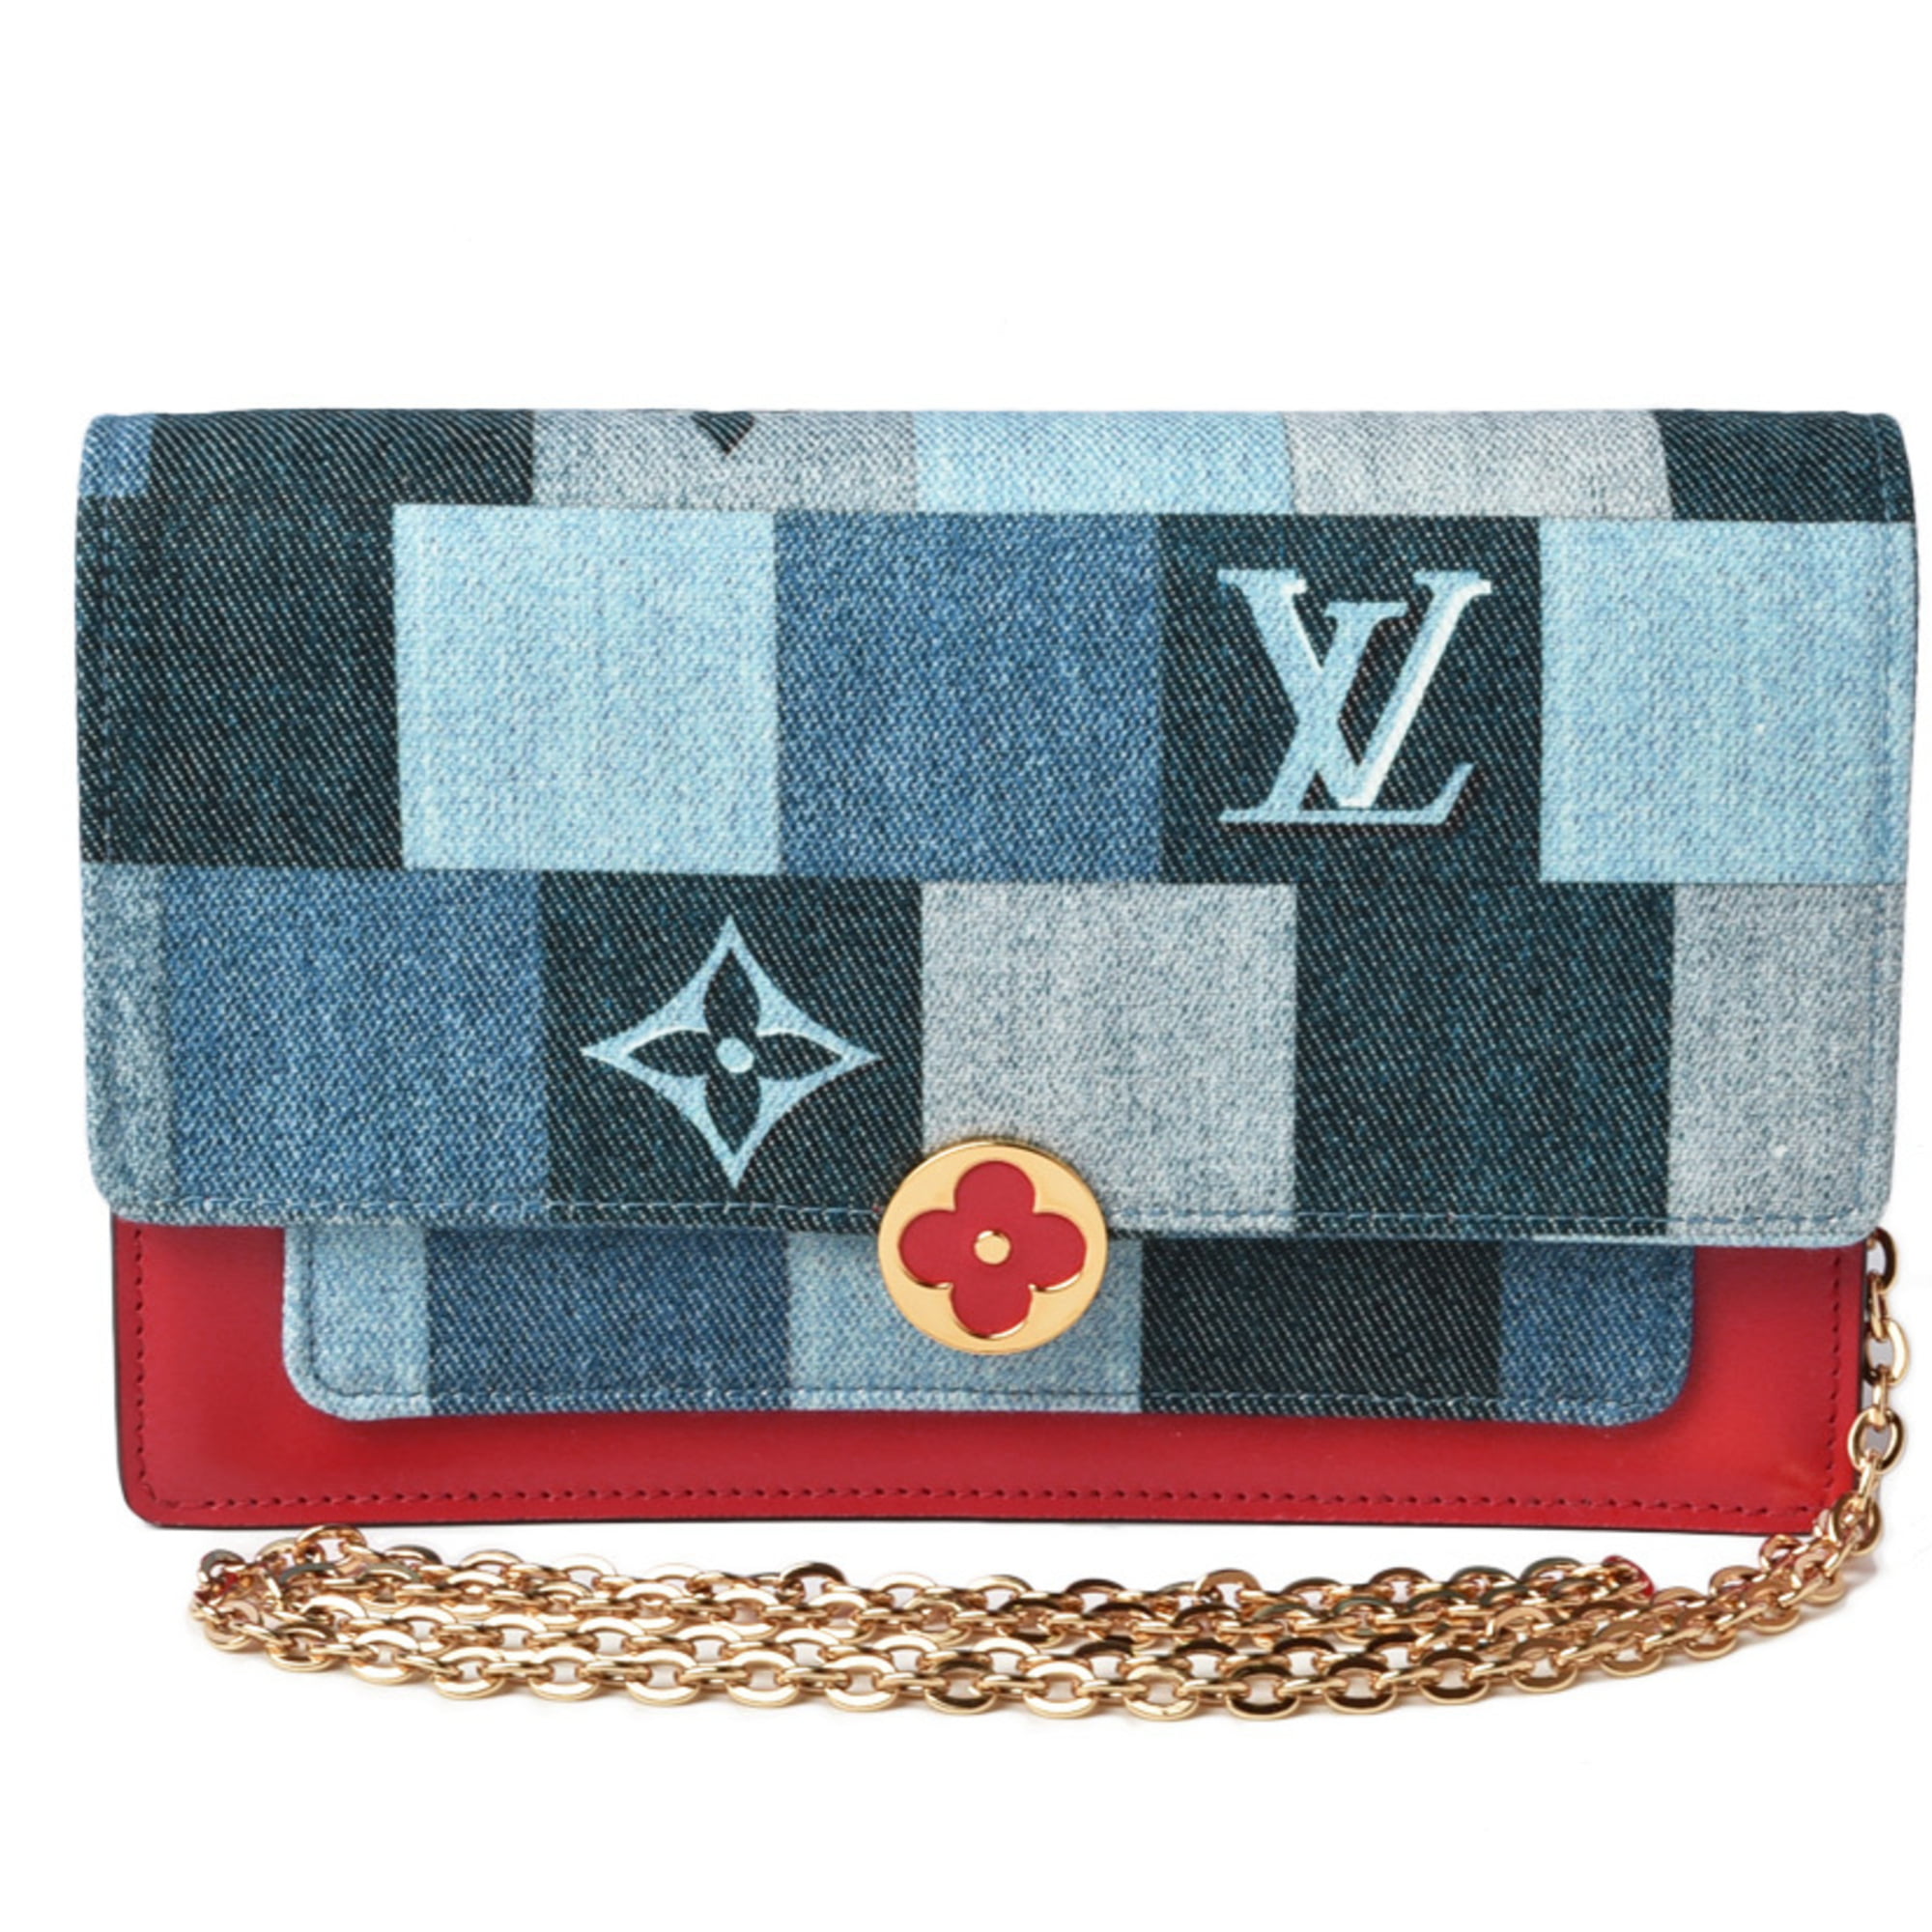 lv wallet with chain｜TikTok Search